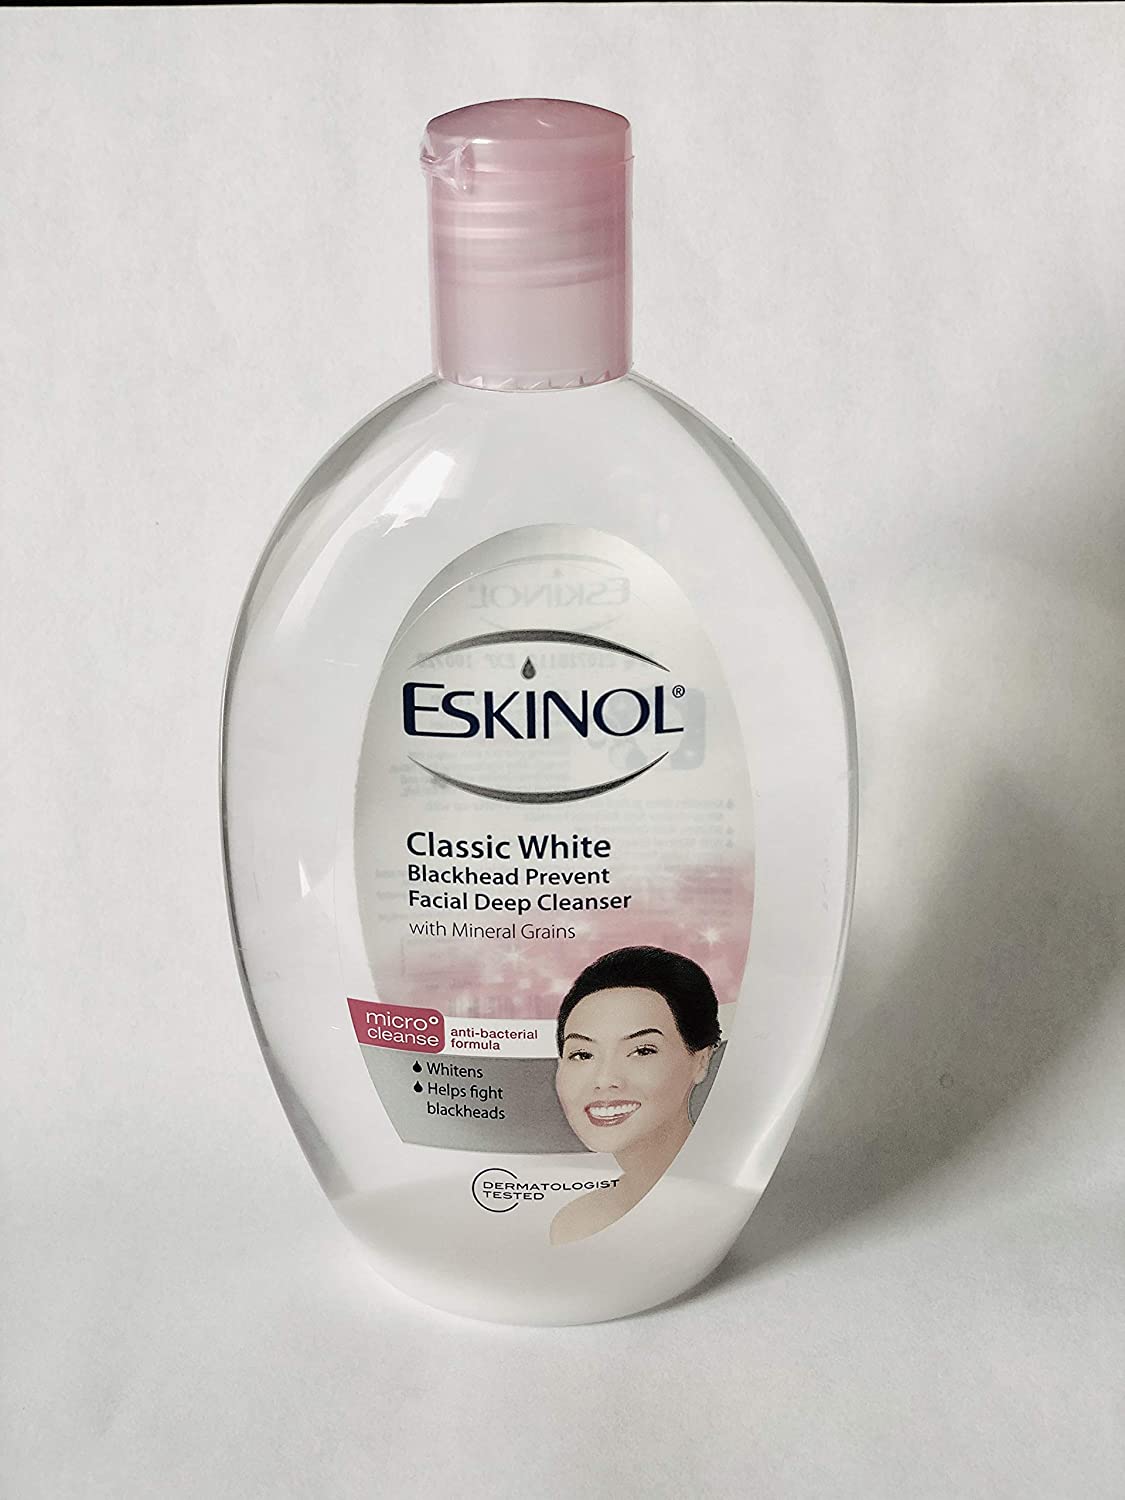 Lot of 2 Eskinol Naturals Classic White with Mineral Grains Facial Cleanser 